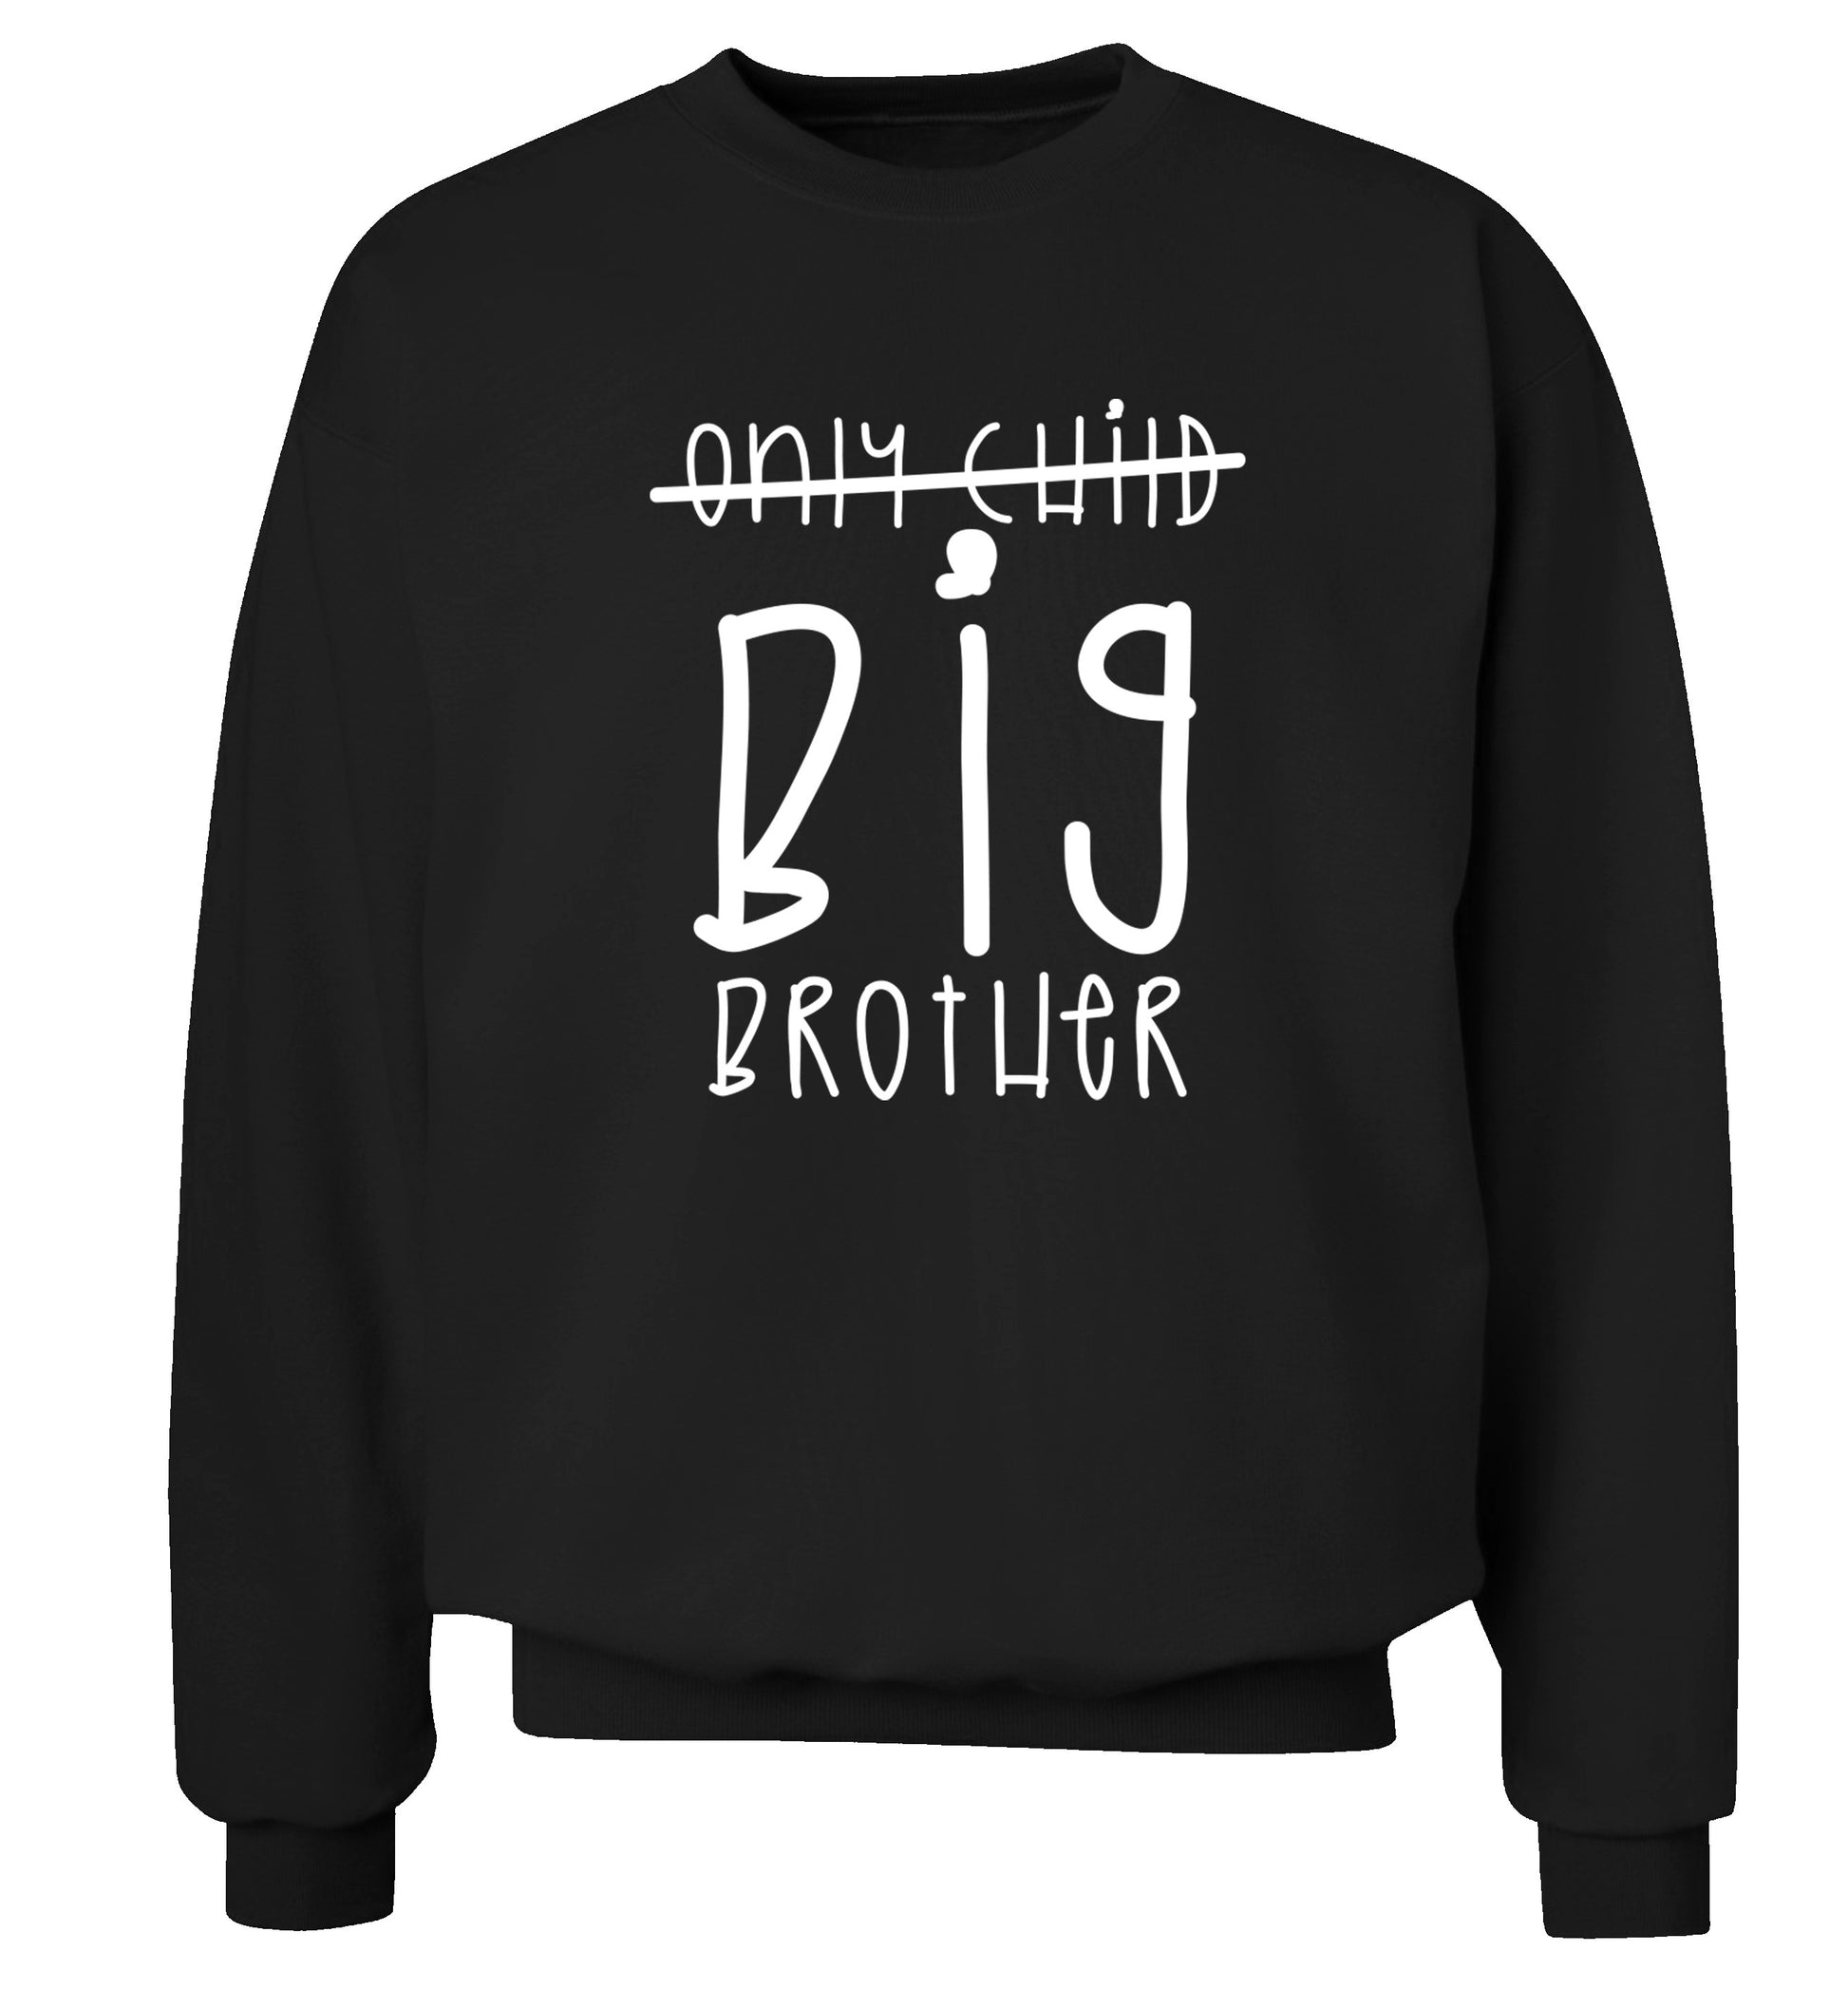 Only child big brother Adult's unisex black Sweater 2XL